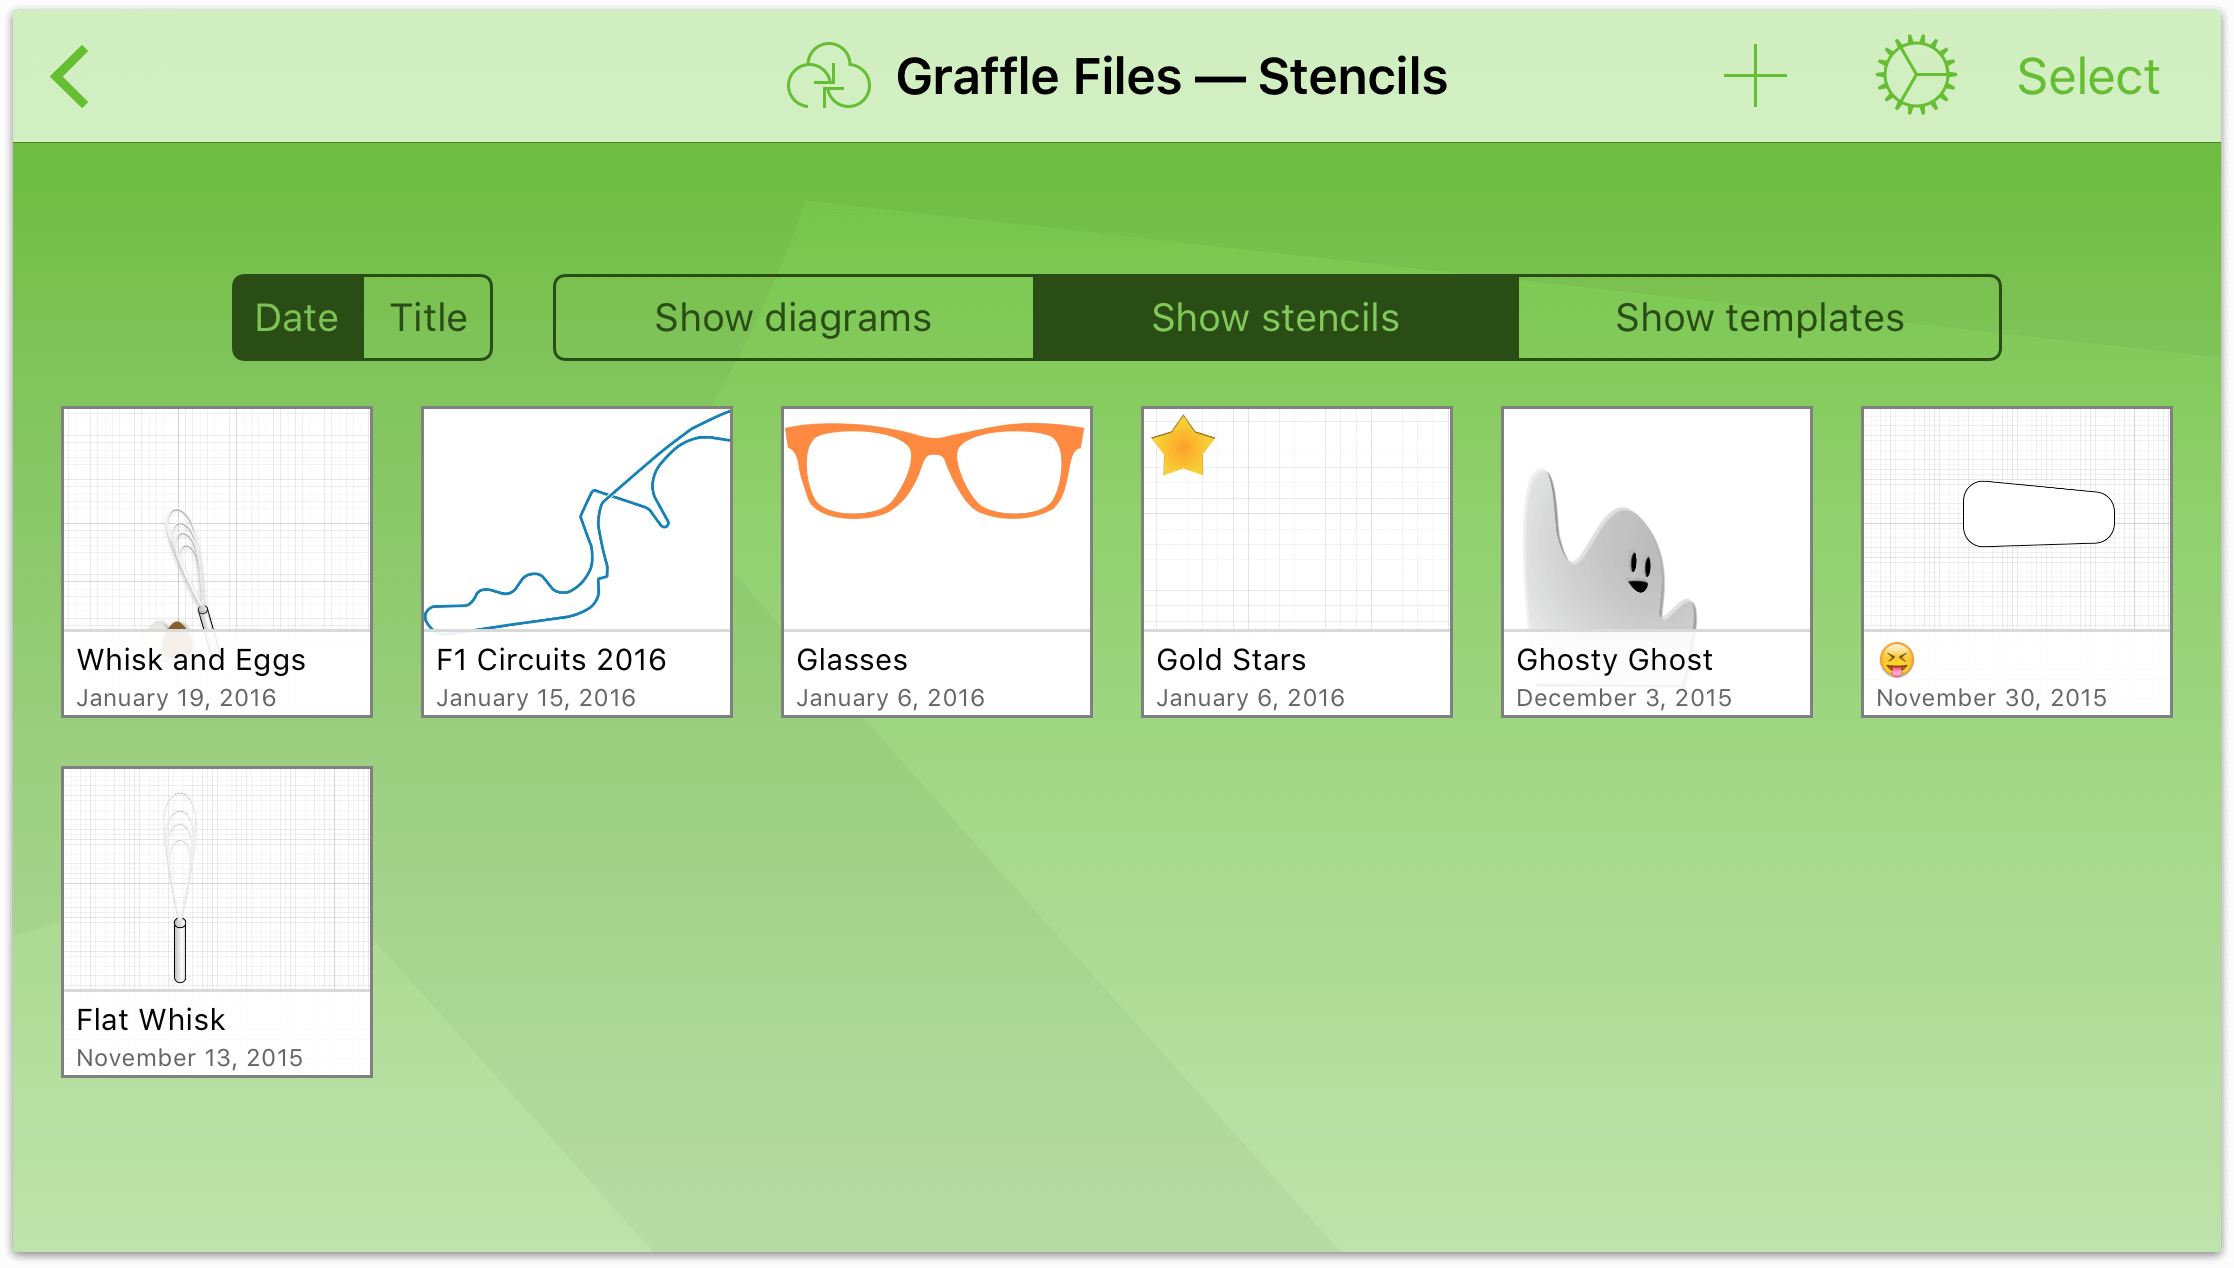 Viewing the Stencil files in the Document Browser